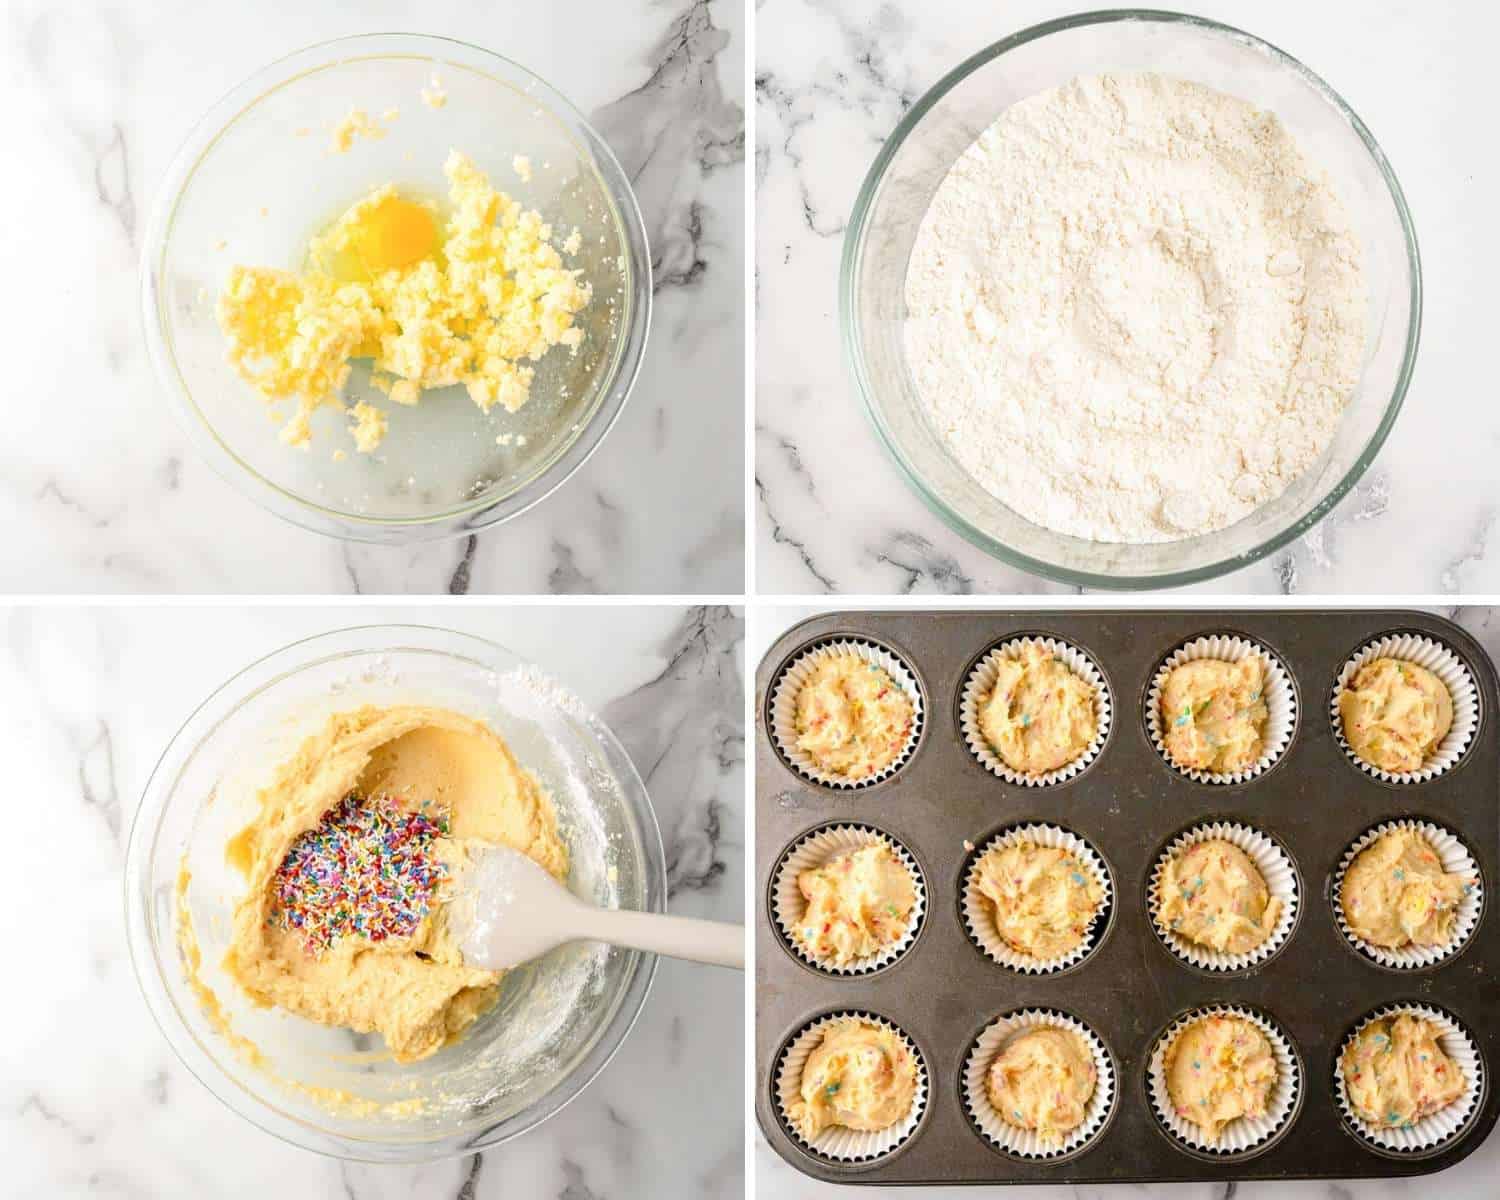 Collage of four images showing how to make funfetti cupcakes